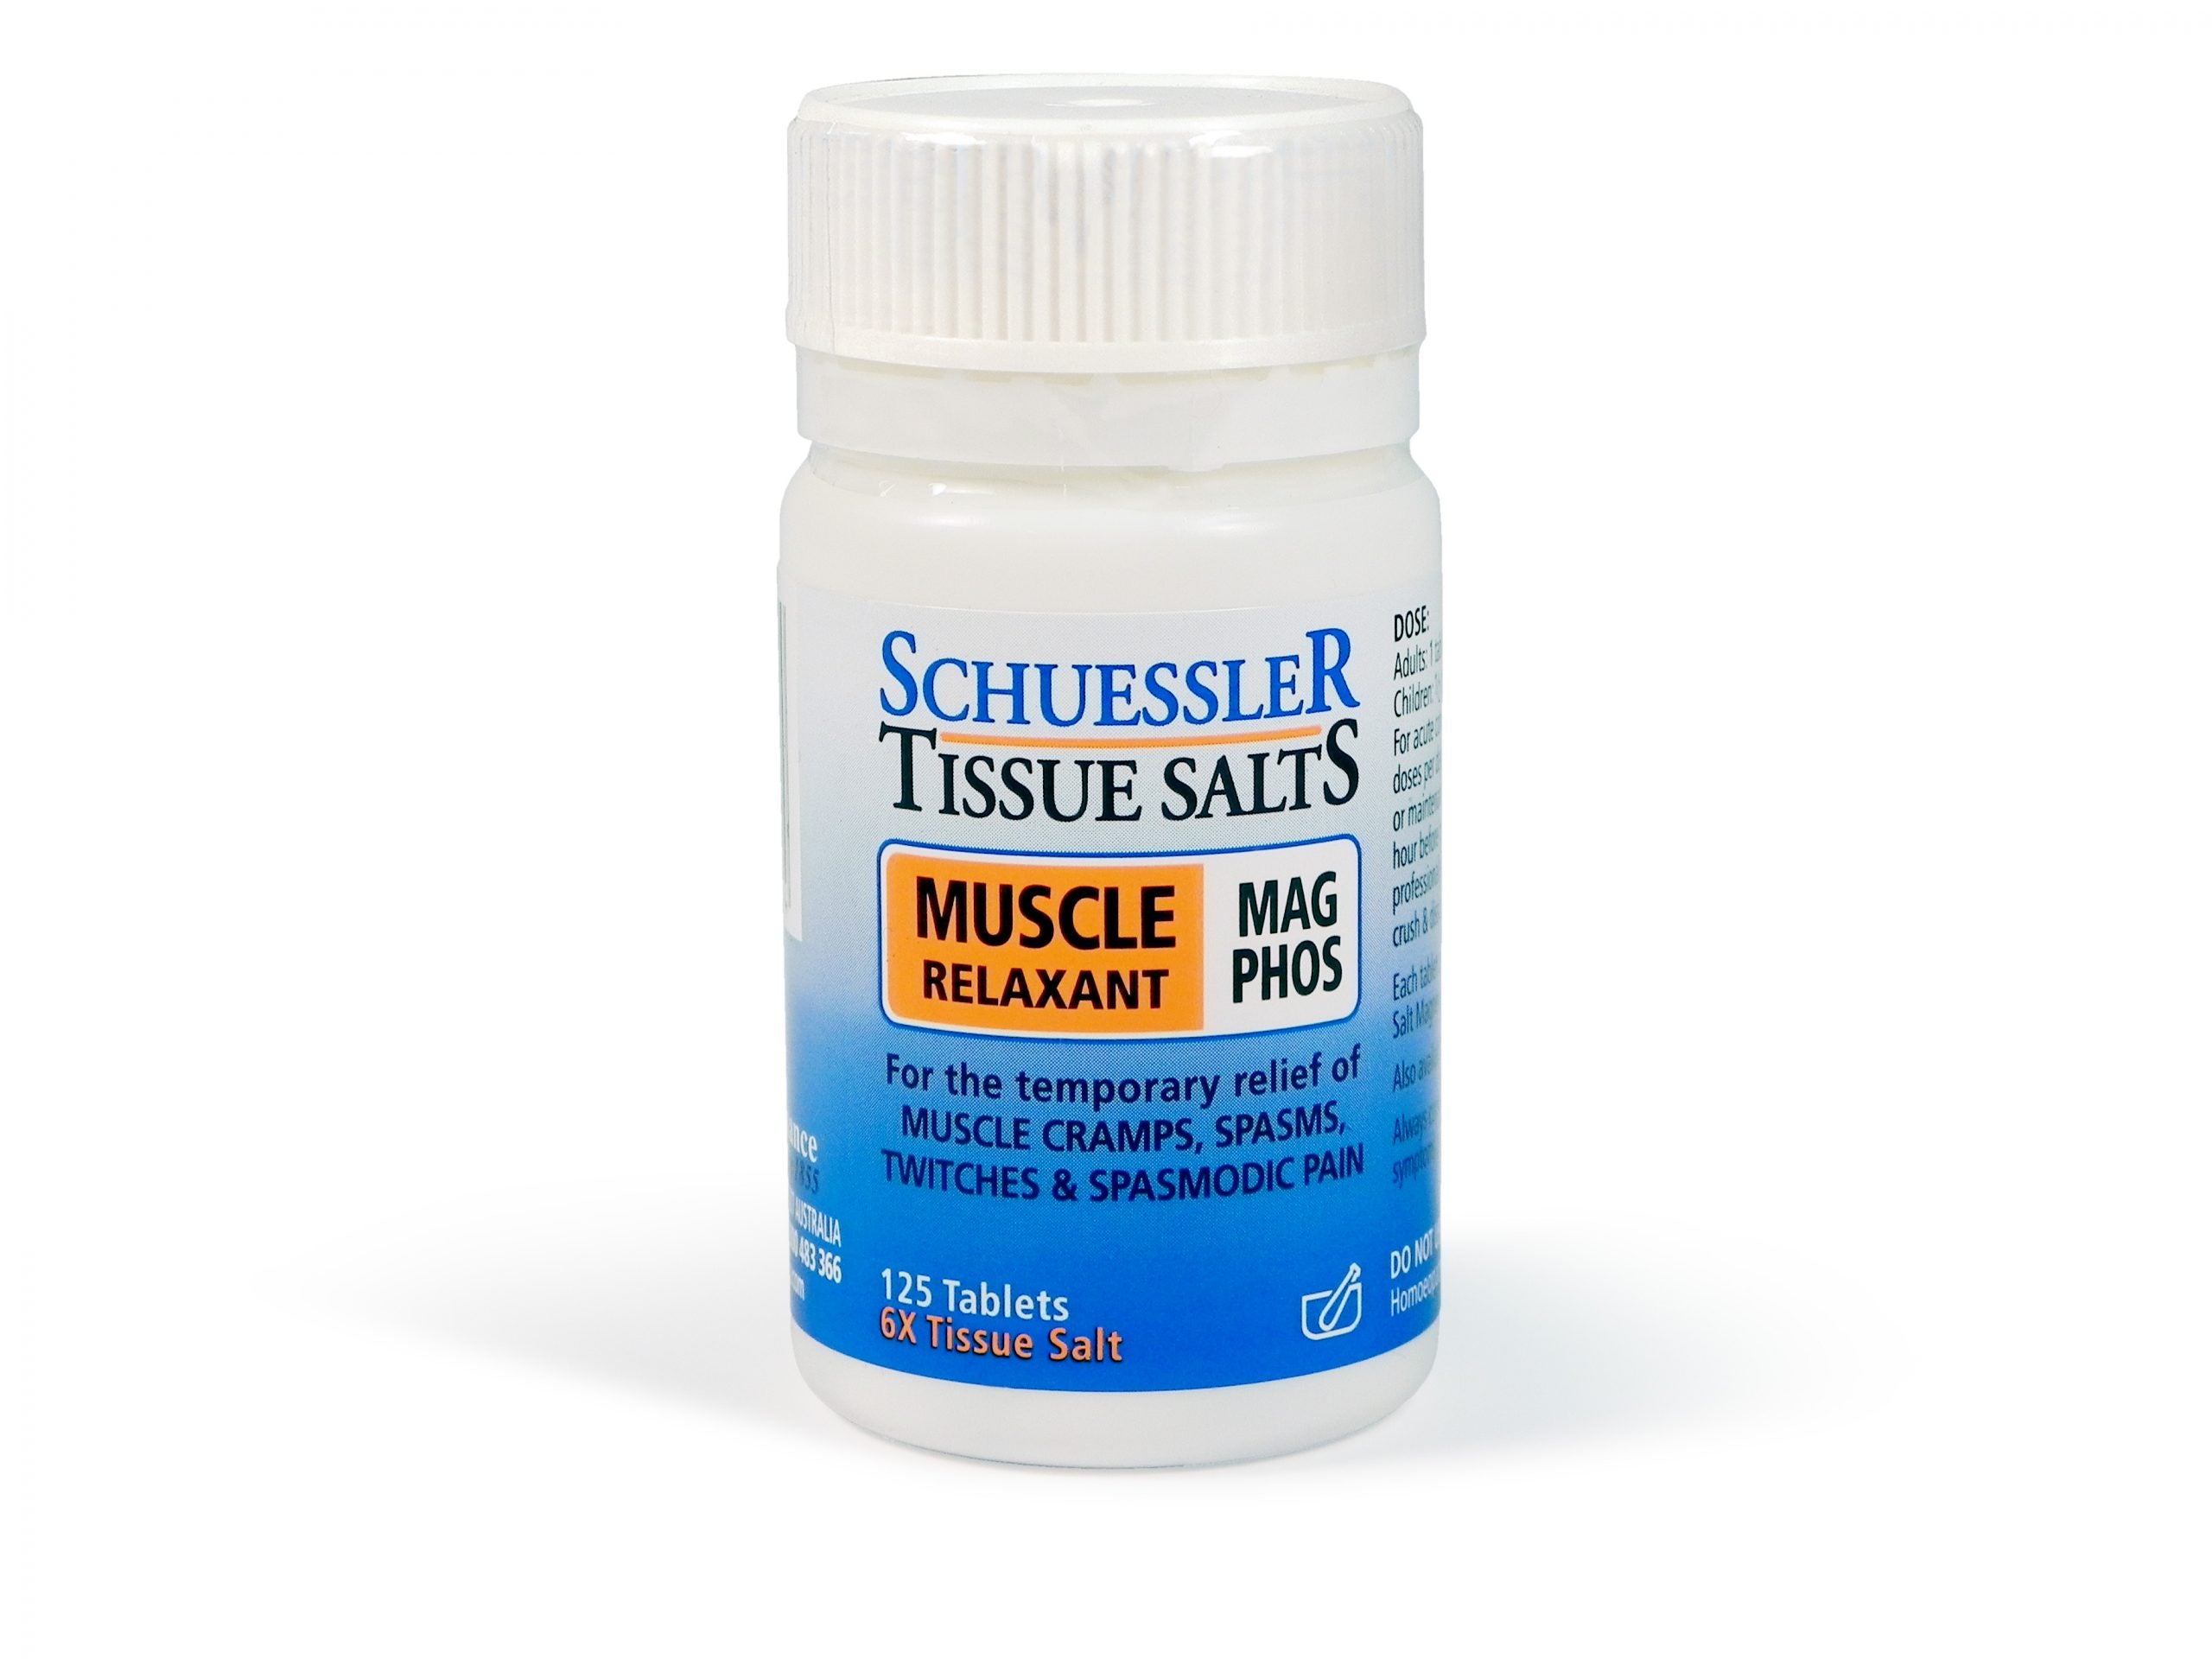 M&P Schuessler Tissue Salts #8 Mag Phos Muscle Relaxant 125 Tablets